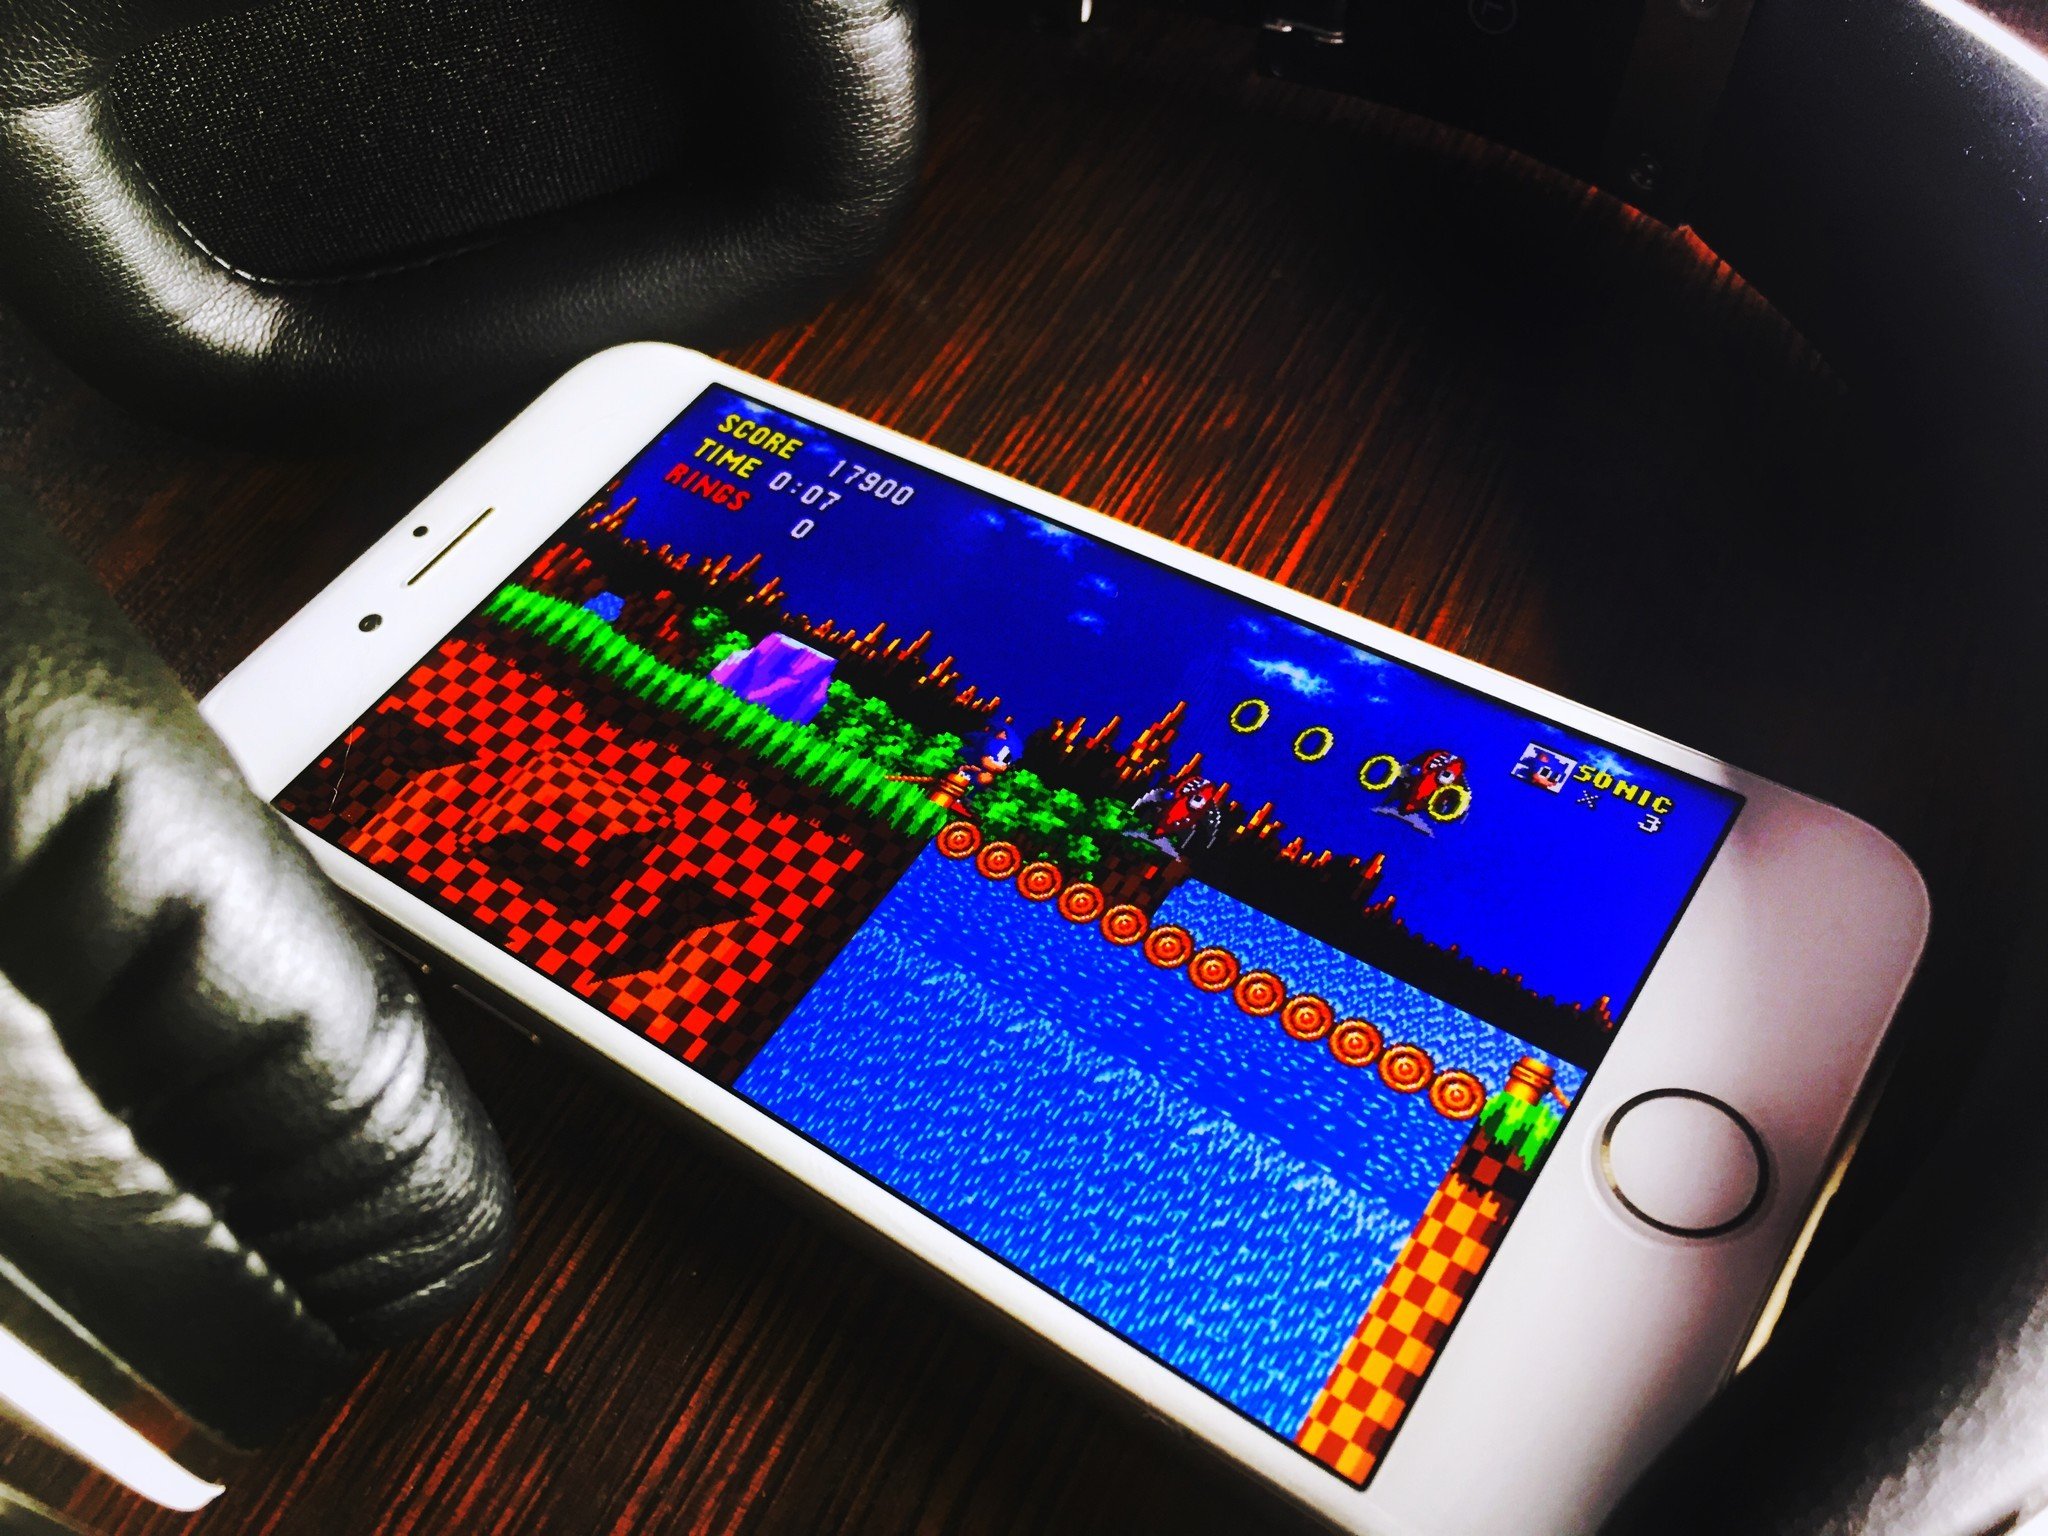 How To Play Retro Games on iPhone - Explosion Of Fun